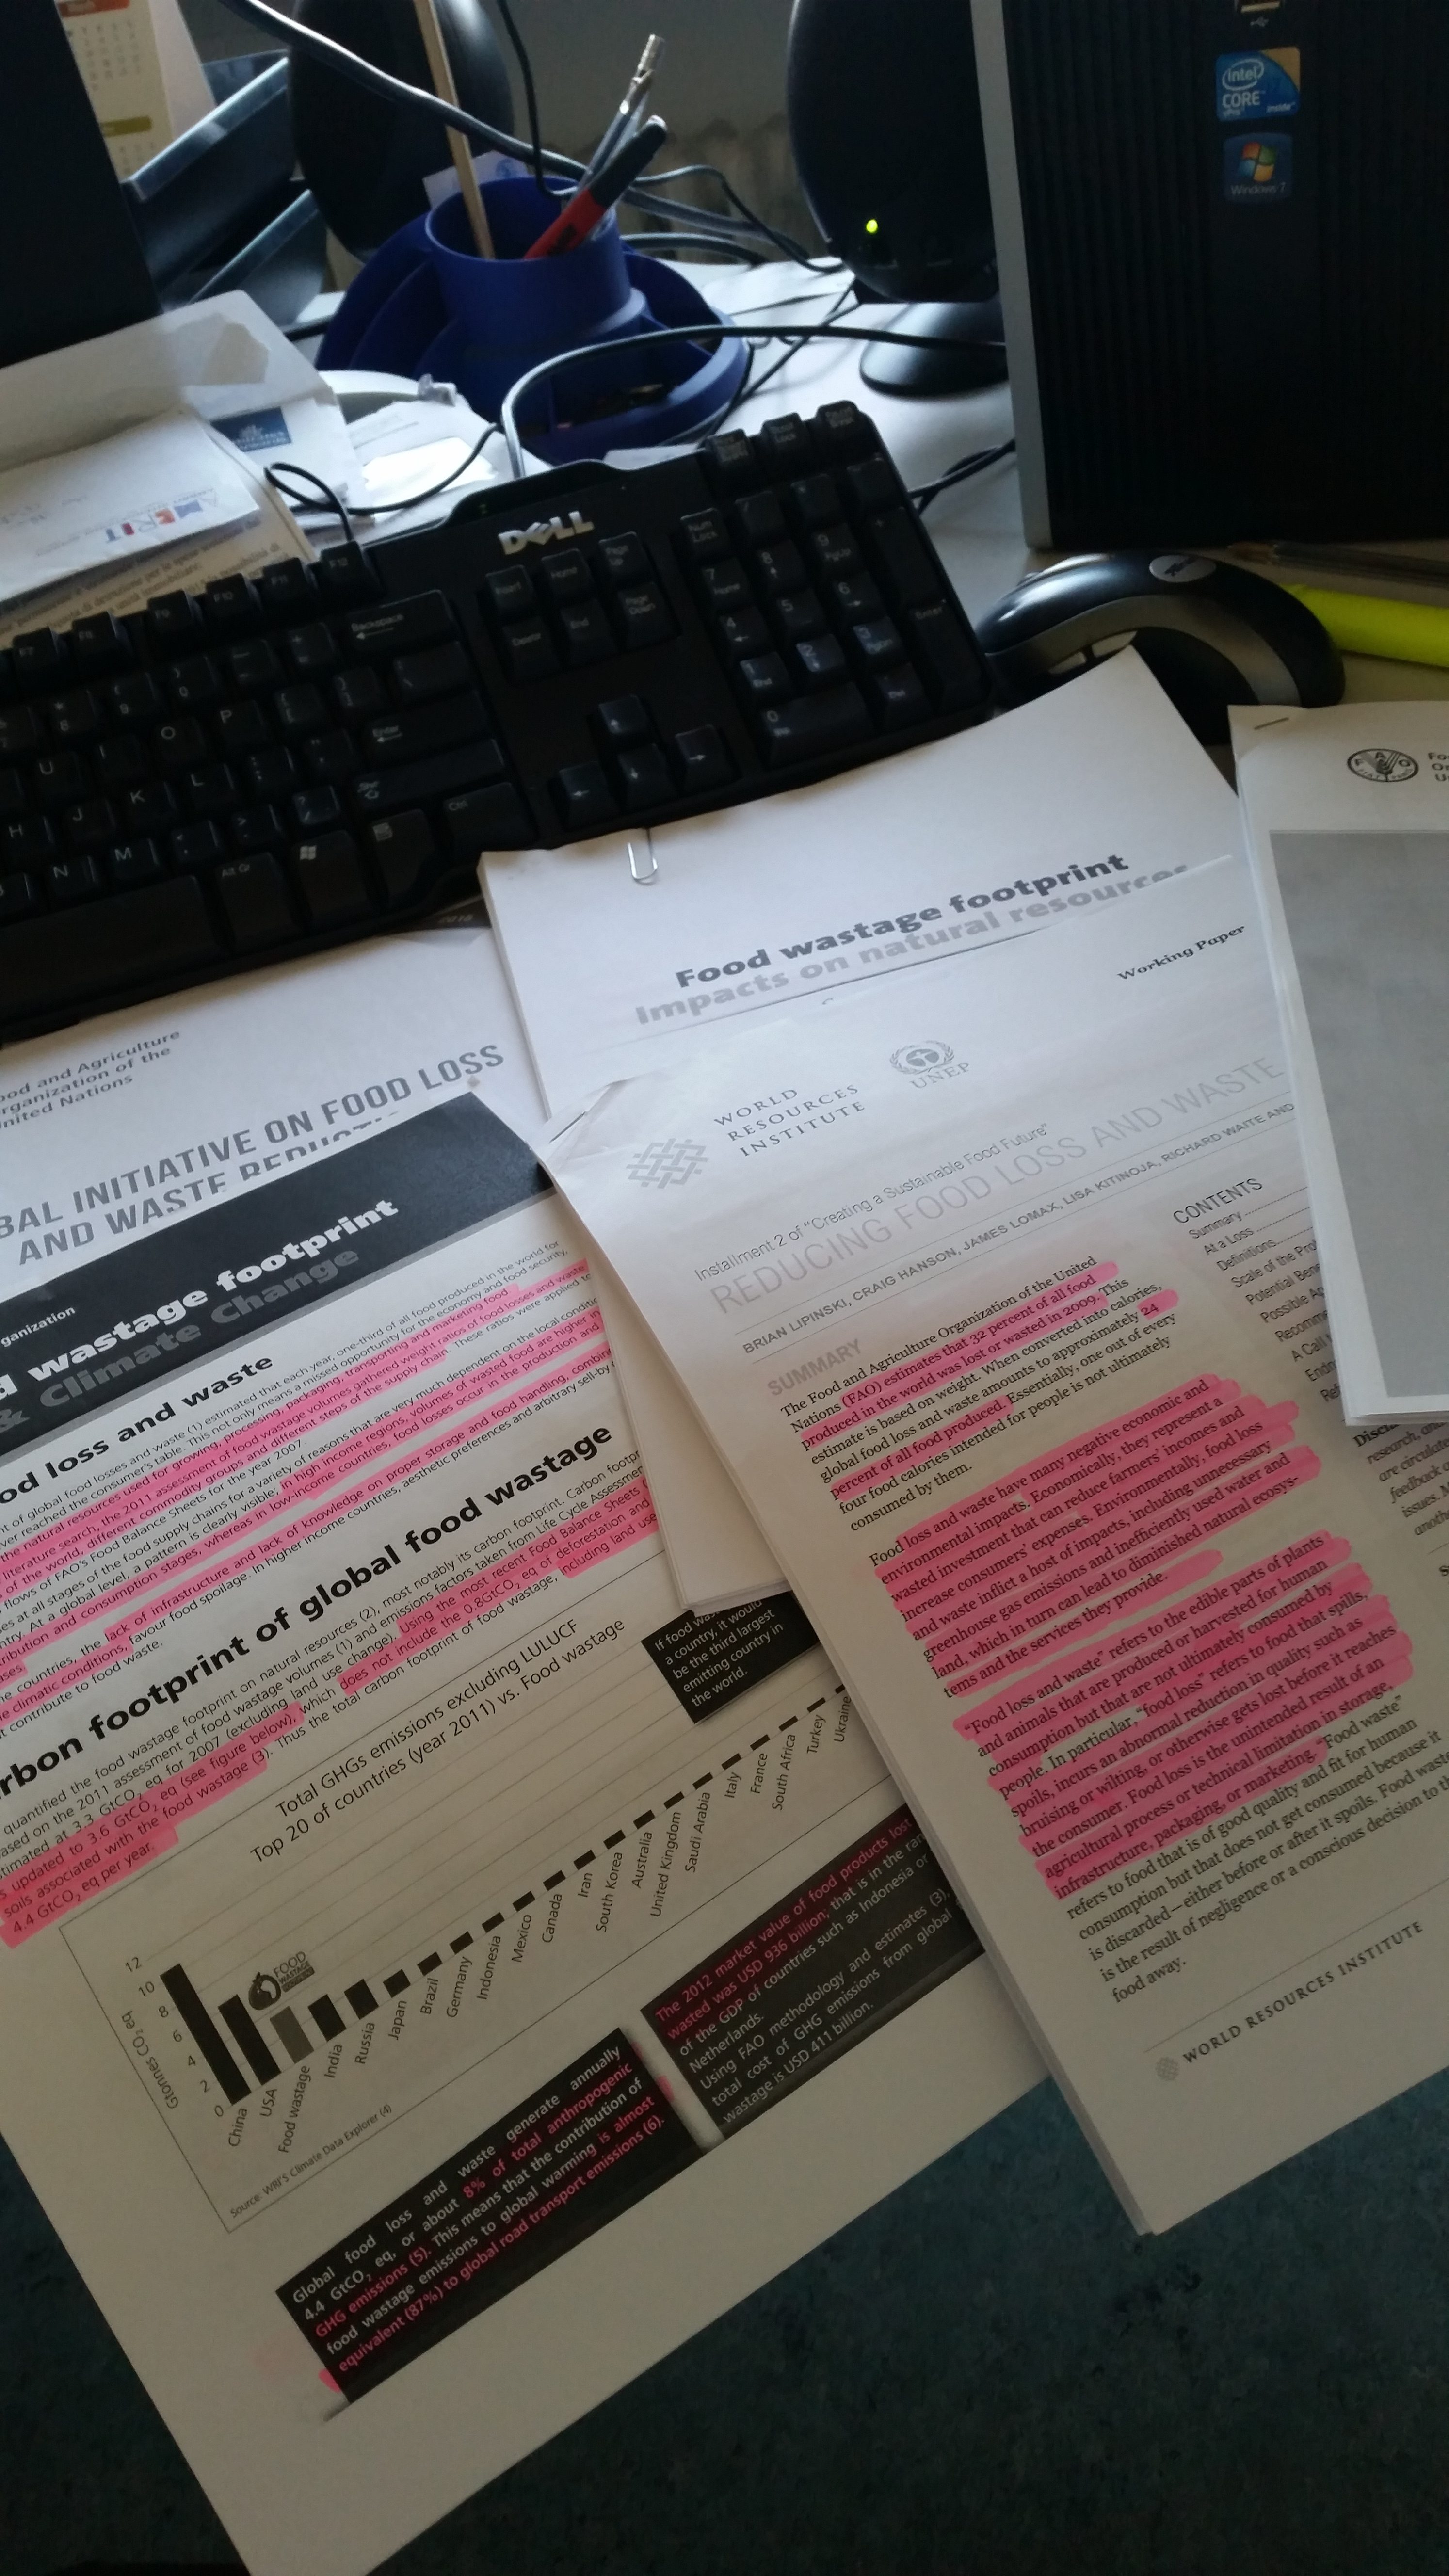 Some of the papers that I analysed as part of the literature review!